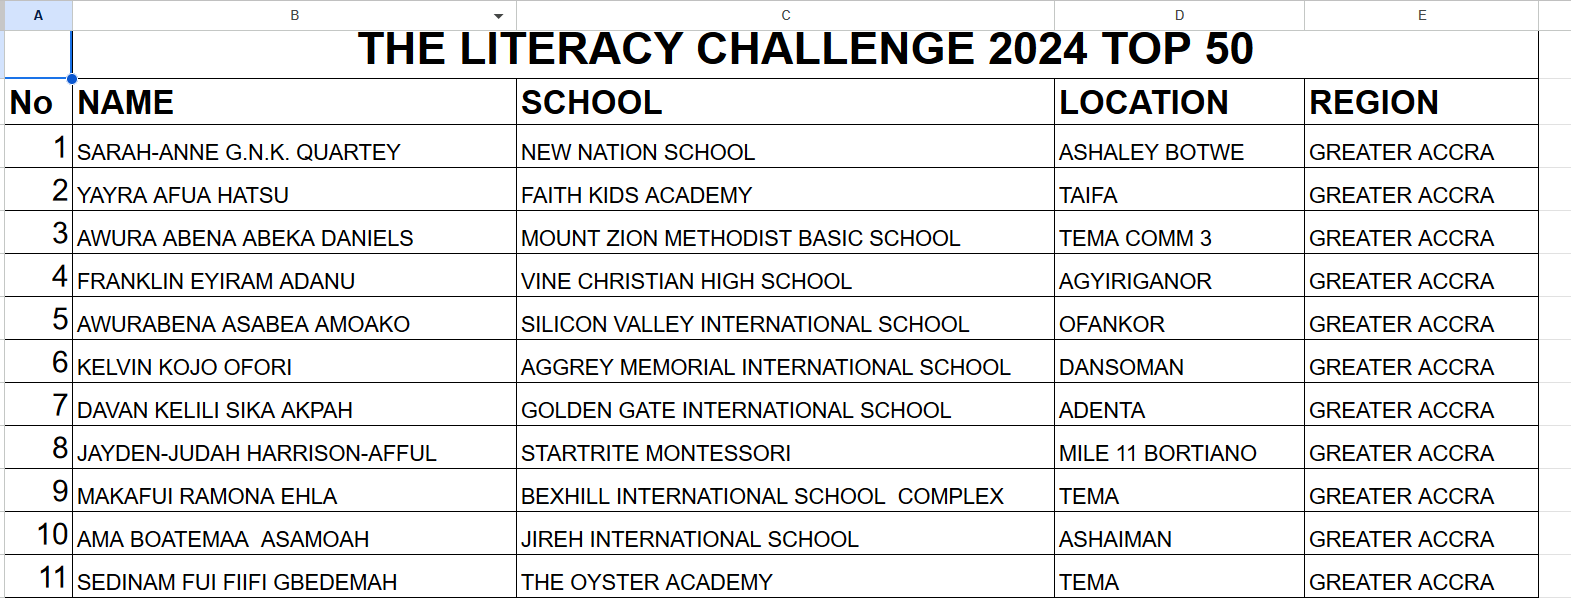 Channel One TV/Citi FM reveals Top 50 candidates for 2024 Literacy Challenge